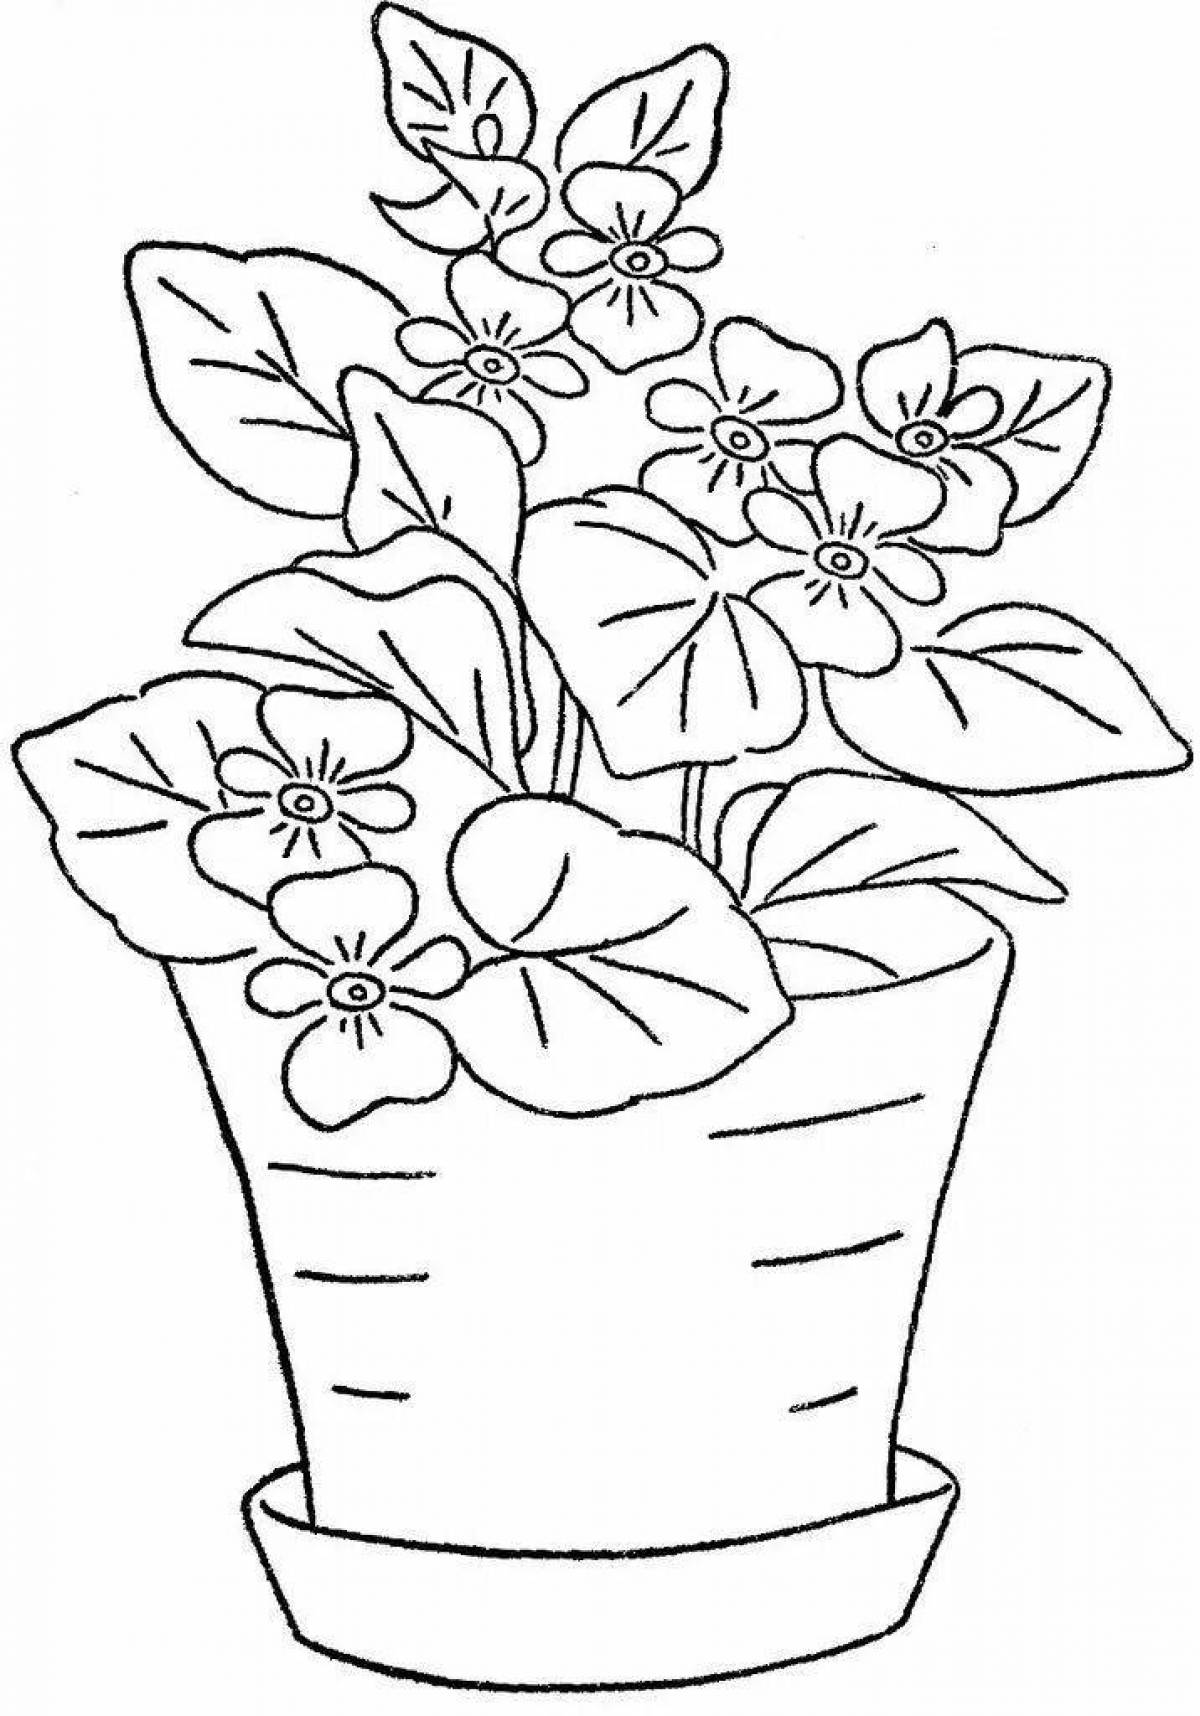 Incredible houseplant coloring book for 4-5 year olds